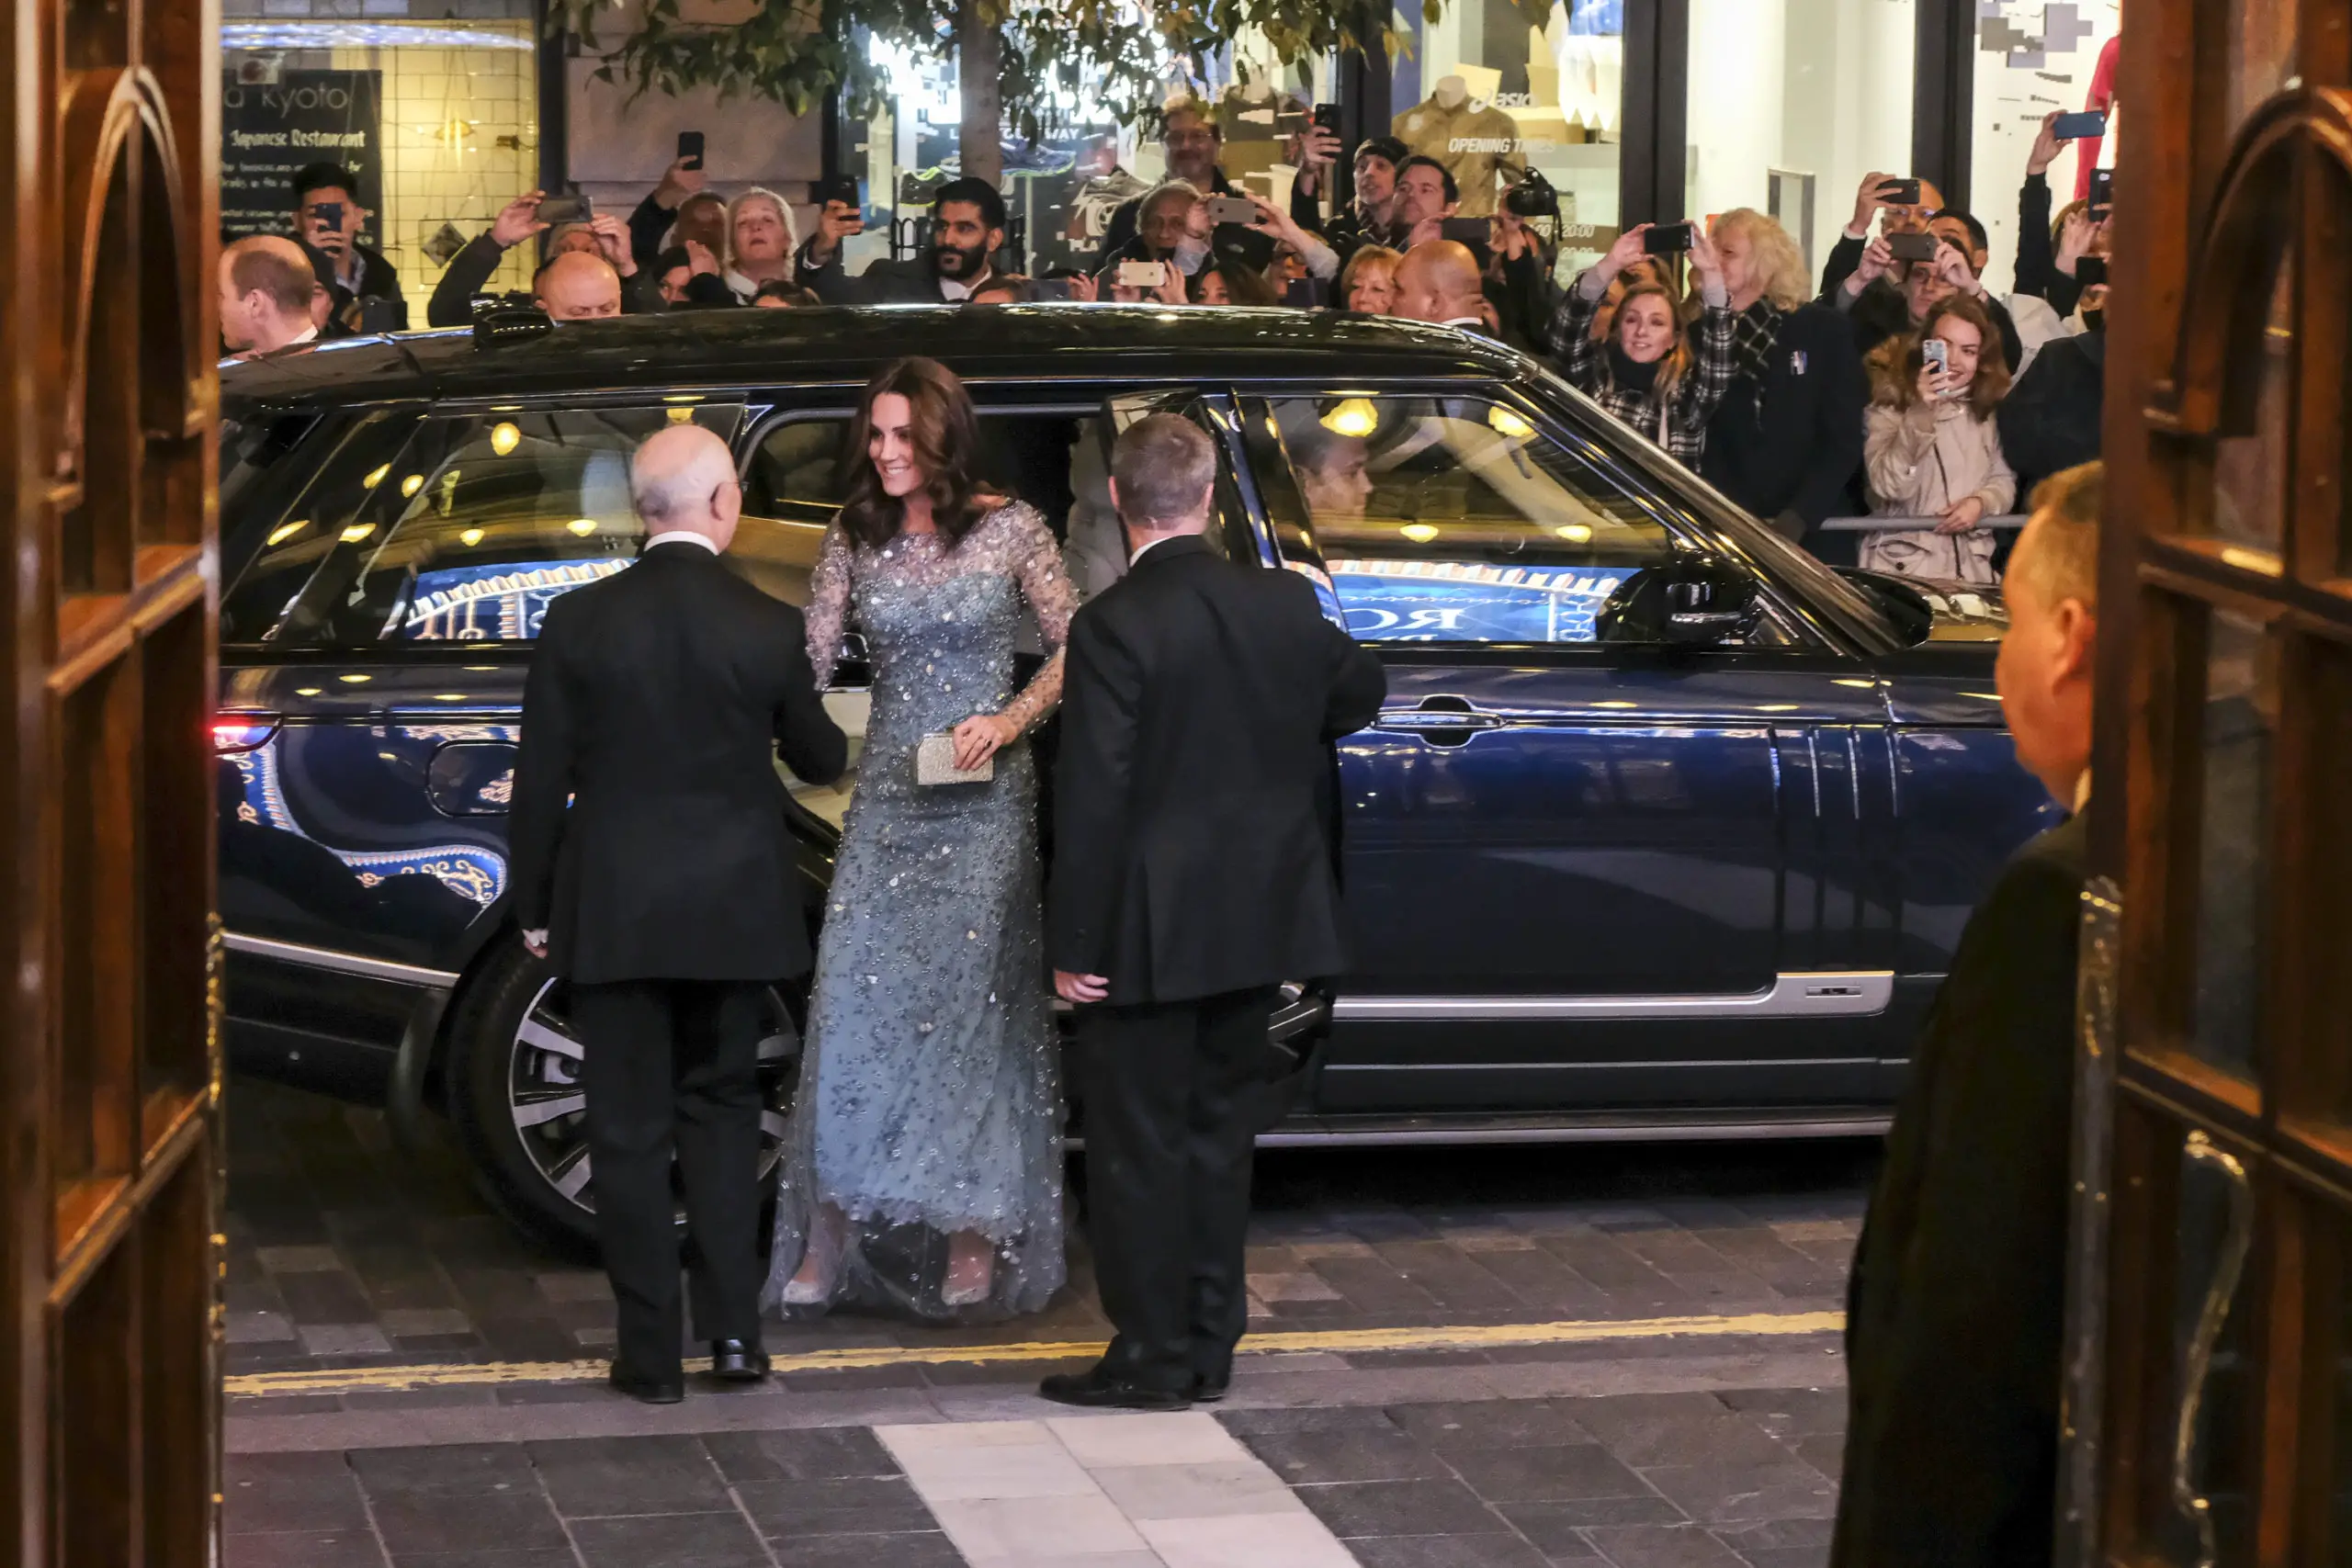 The Duke and Duchess of Cambridge attended Royal Variety Performance in November 2017